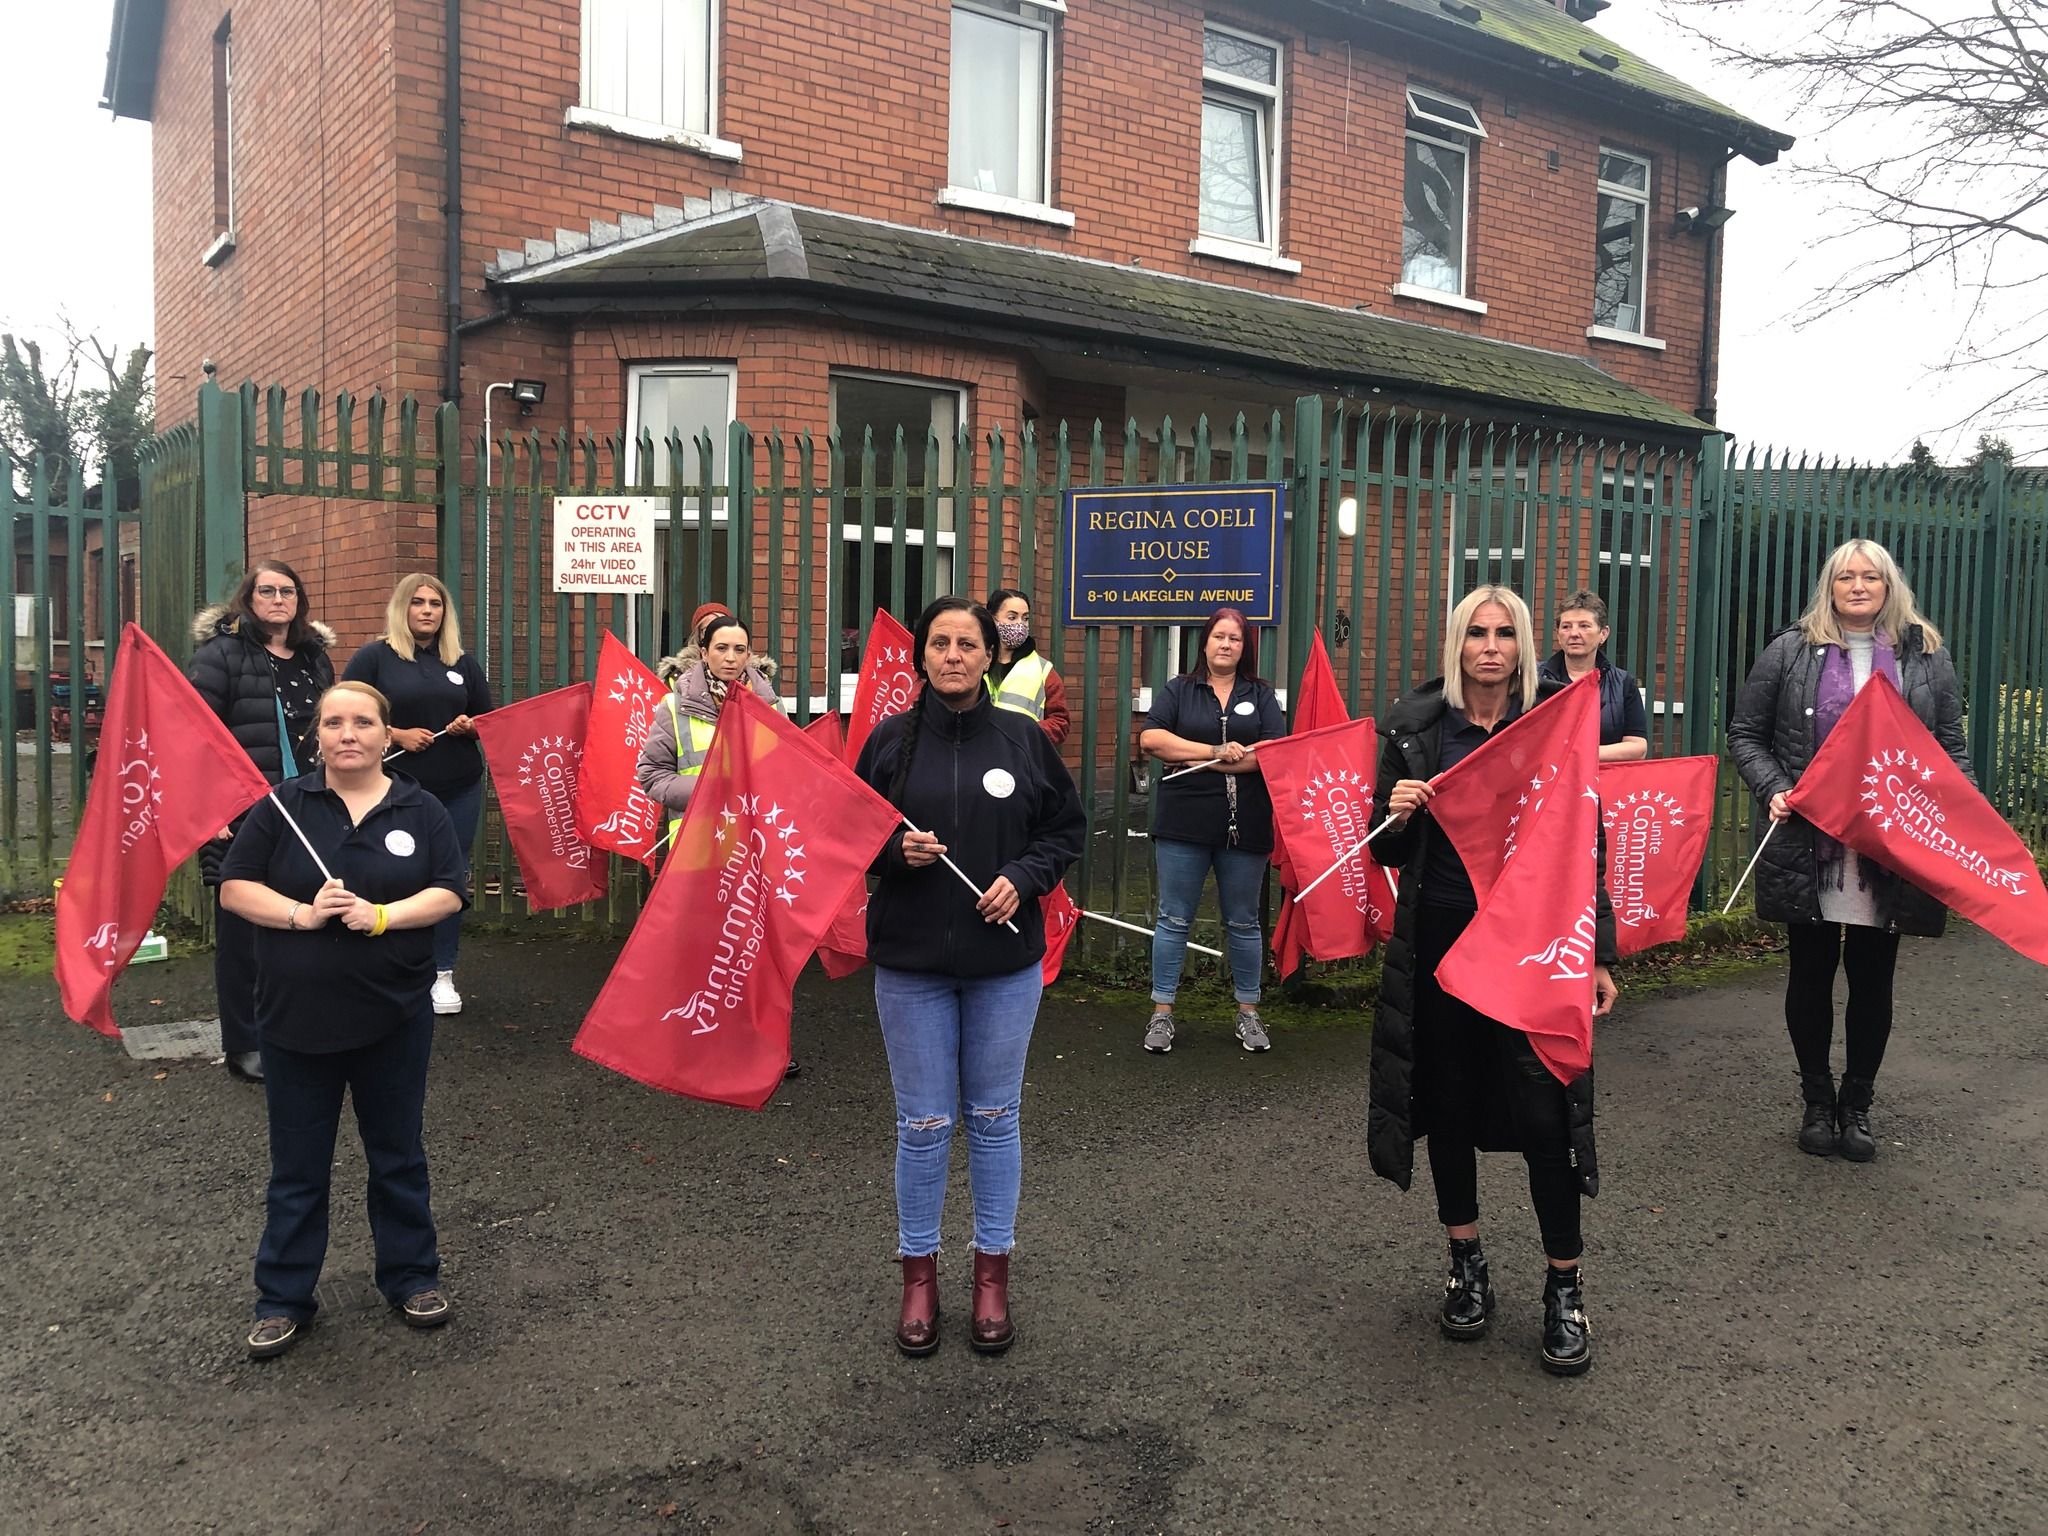 STANDING TOGETHER: Unite the union members are staging a \"work-in\" to save Regina Coeli House from closure